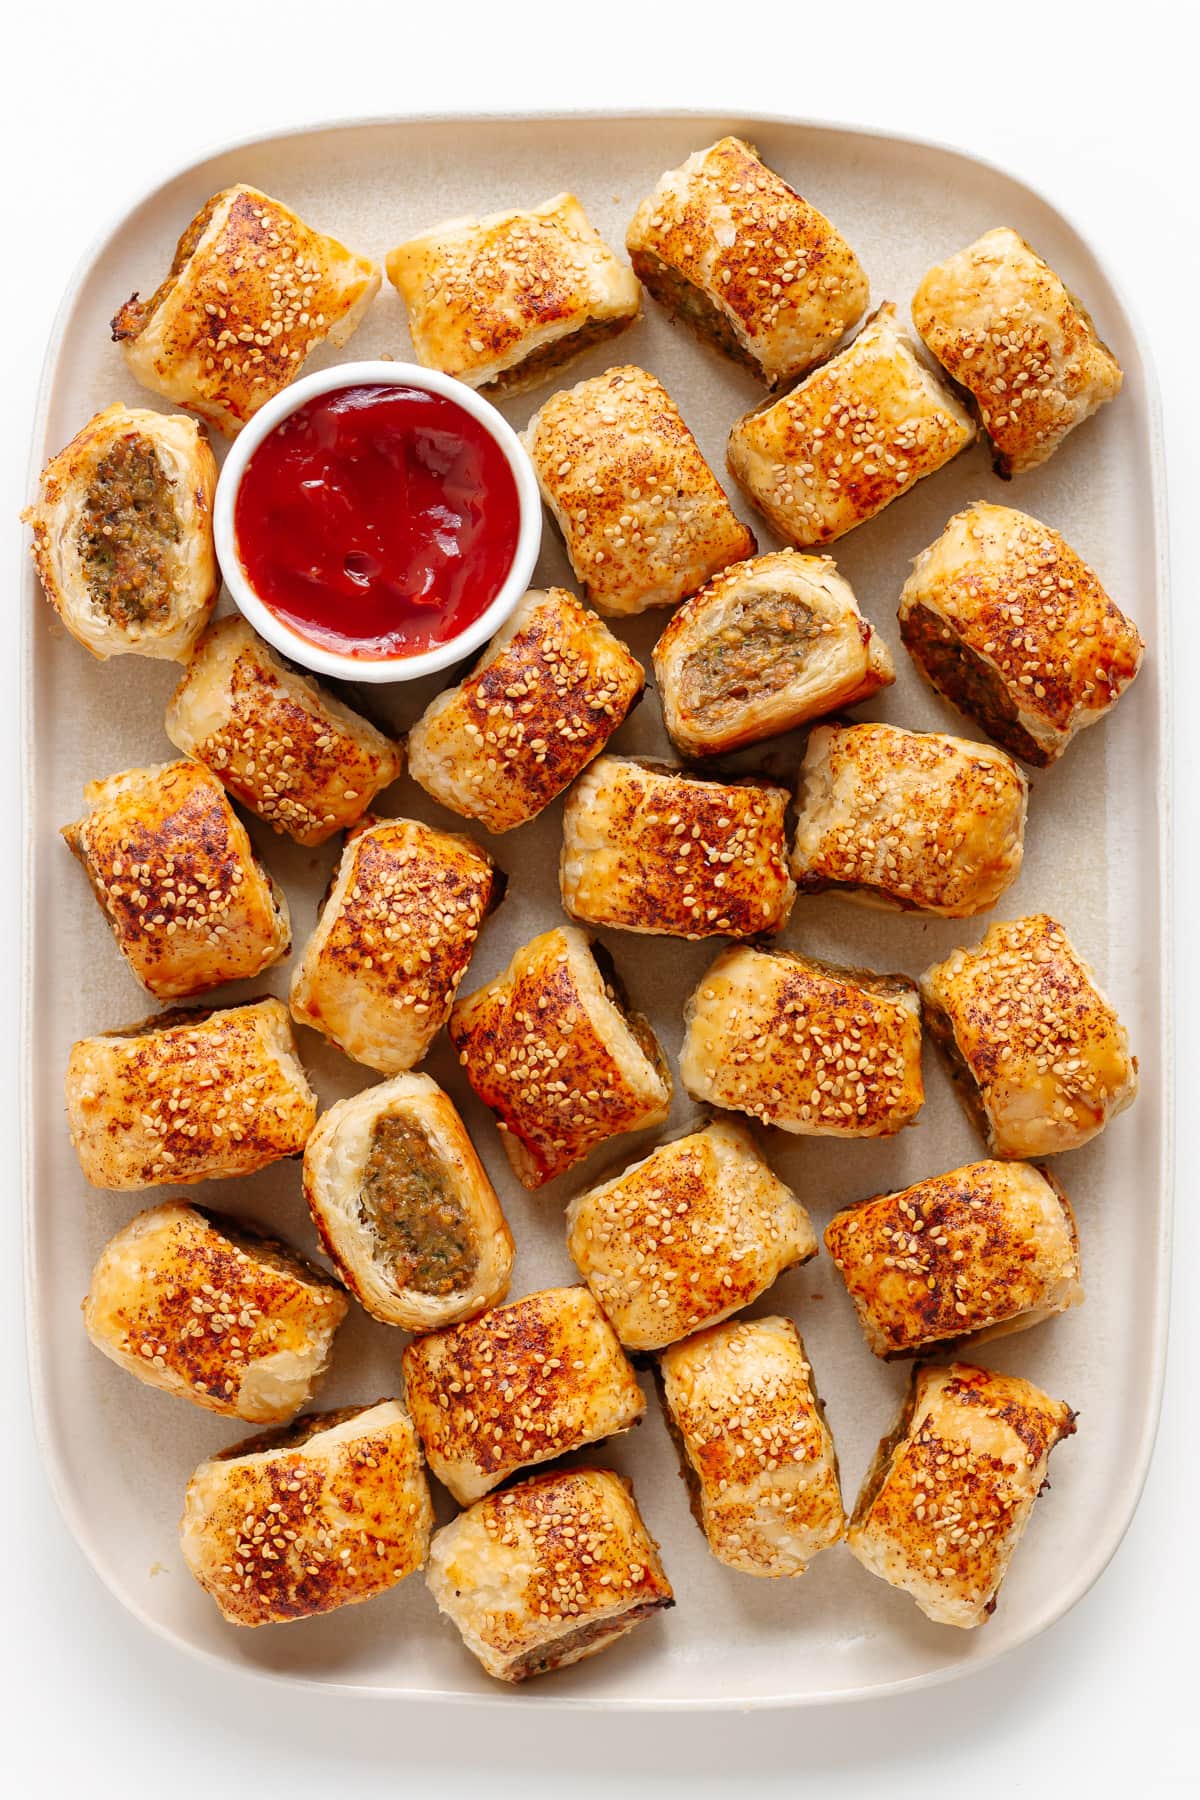 Rectangular platter of chicken sausage rolls with a small bowl of ketchup for dipping.